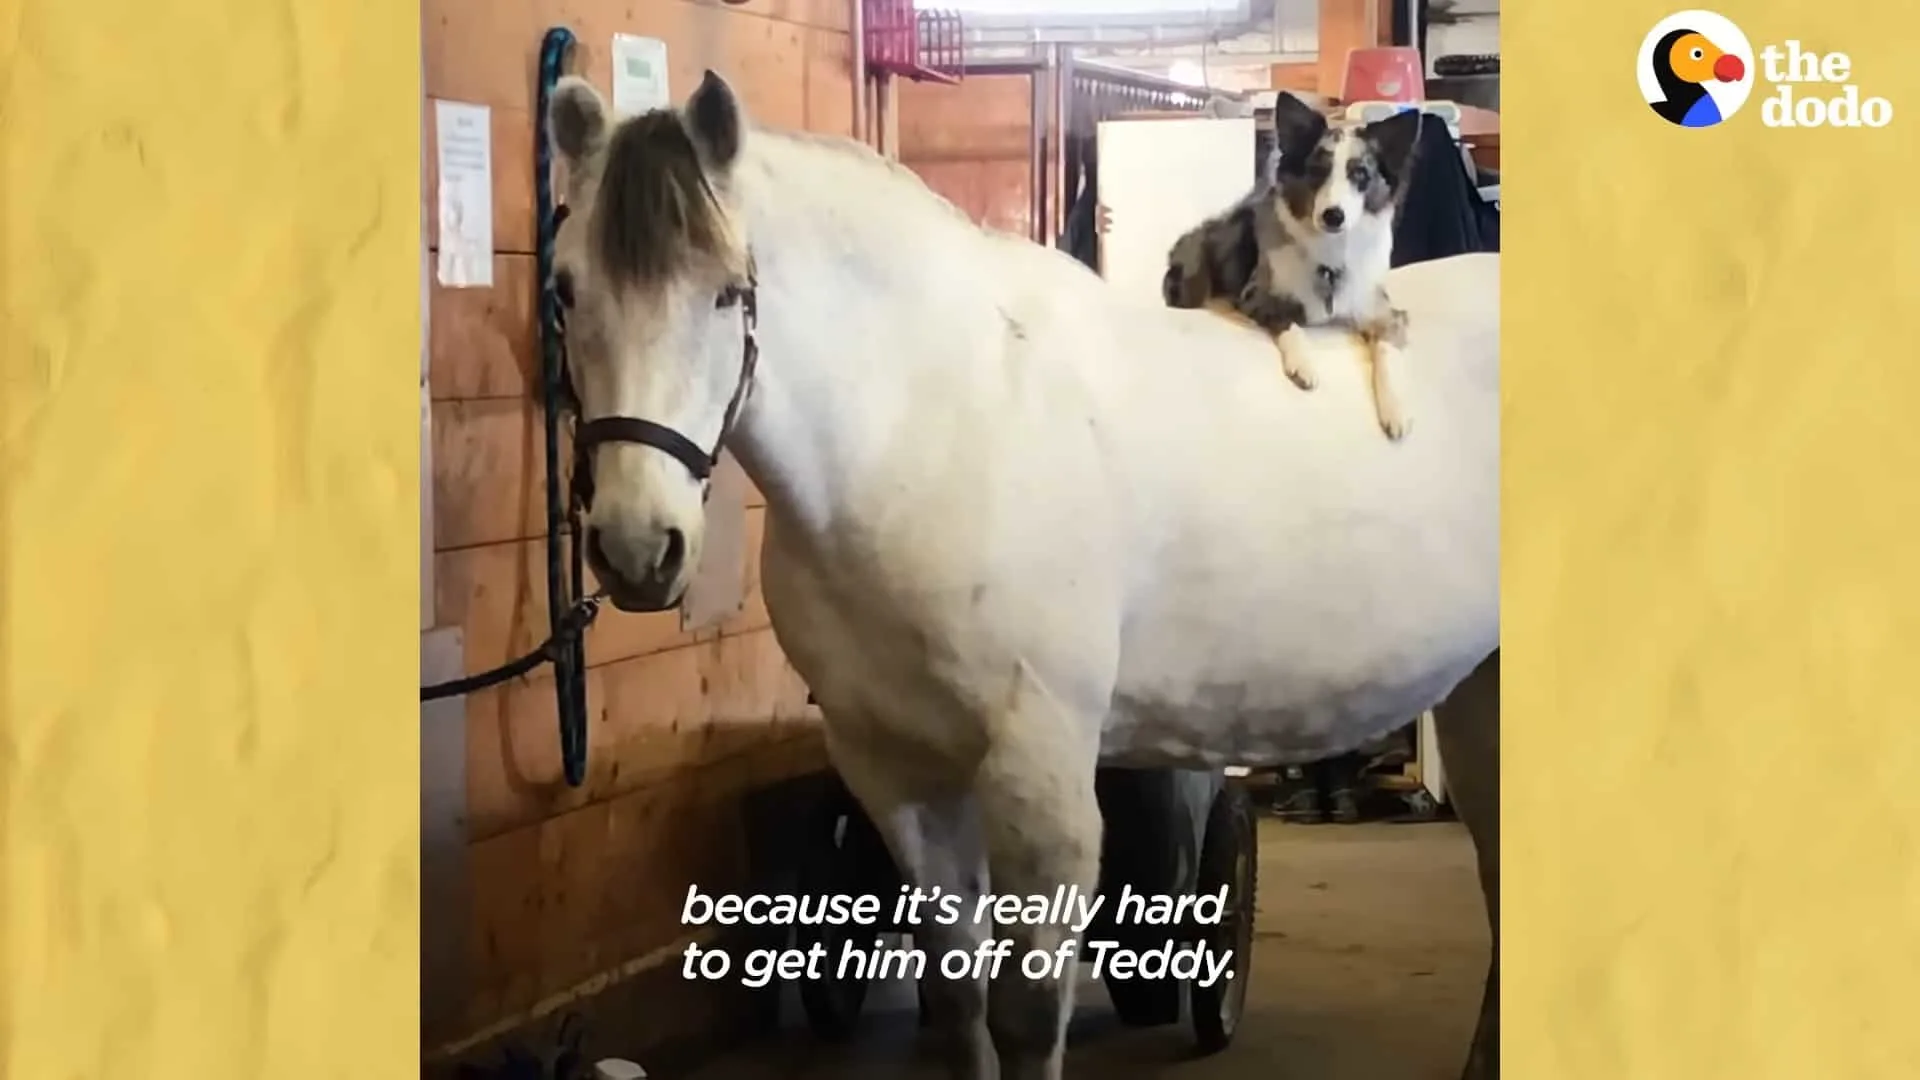 gsd standing on horse's back